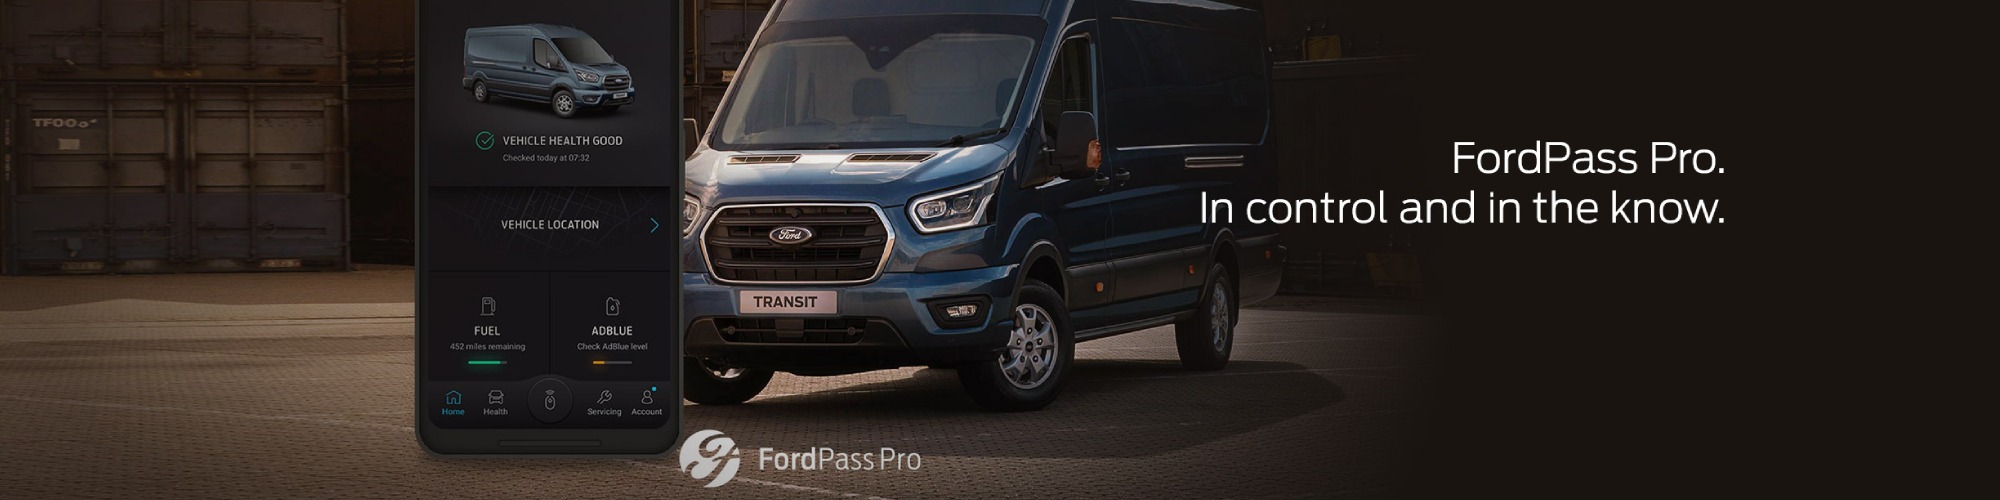 ford-transit ford-pass-pro Banner